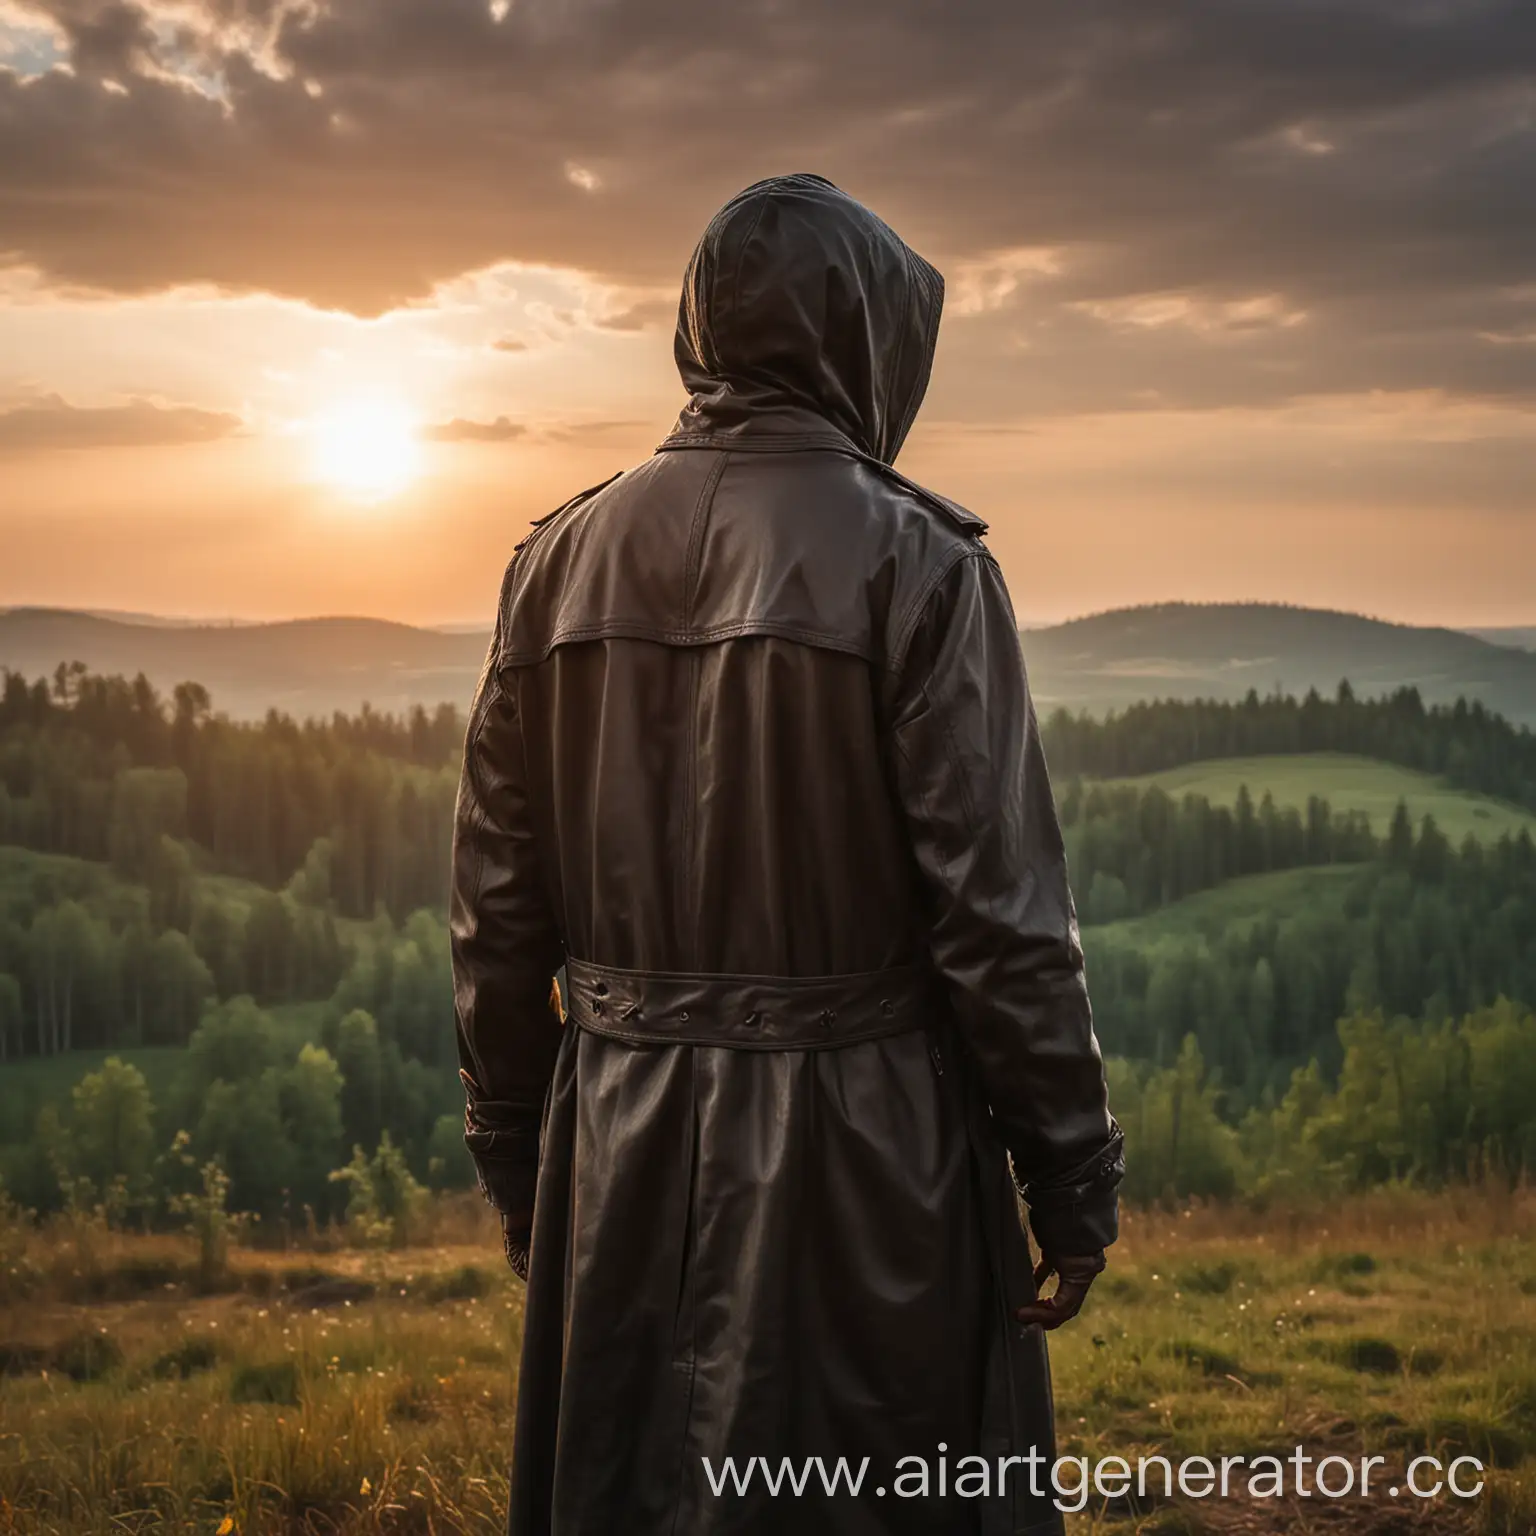 Mysterious-Figure-in-Leather-Trench-Coat-Gazes-at-Sunset-Field